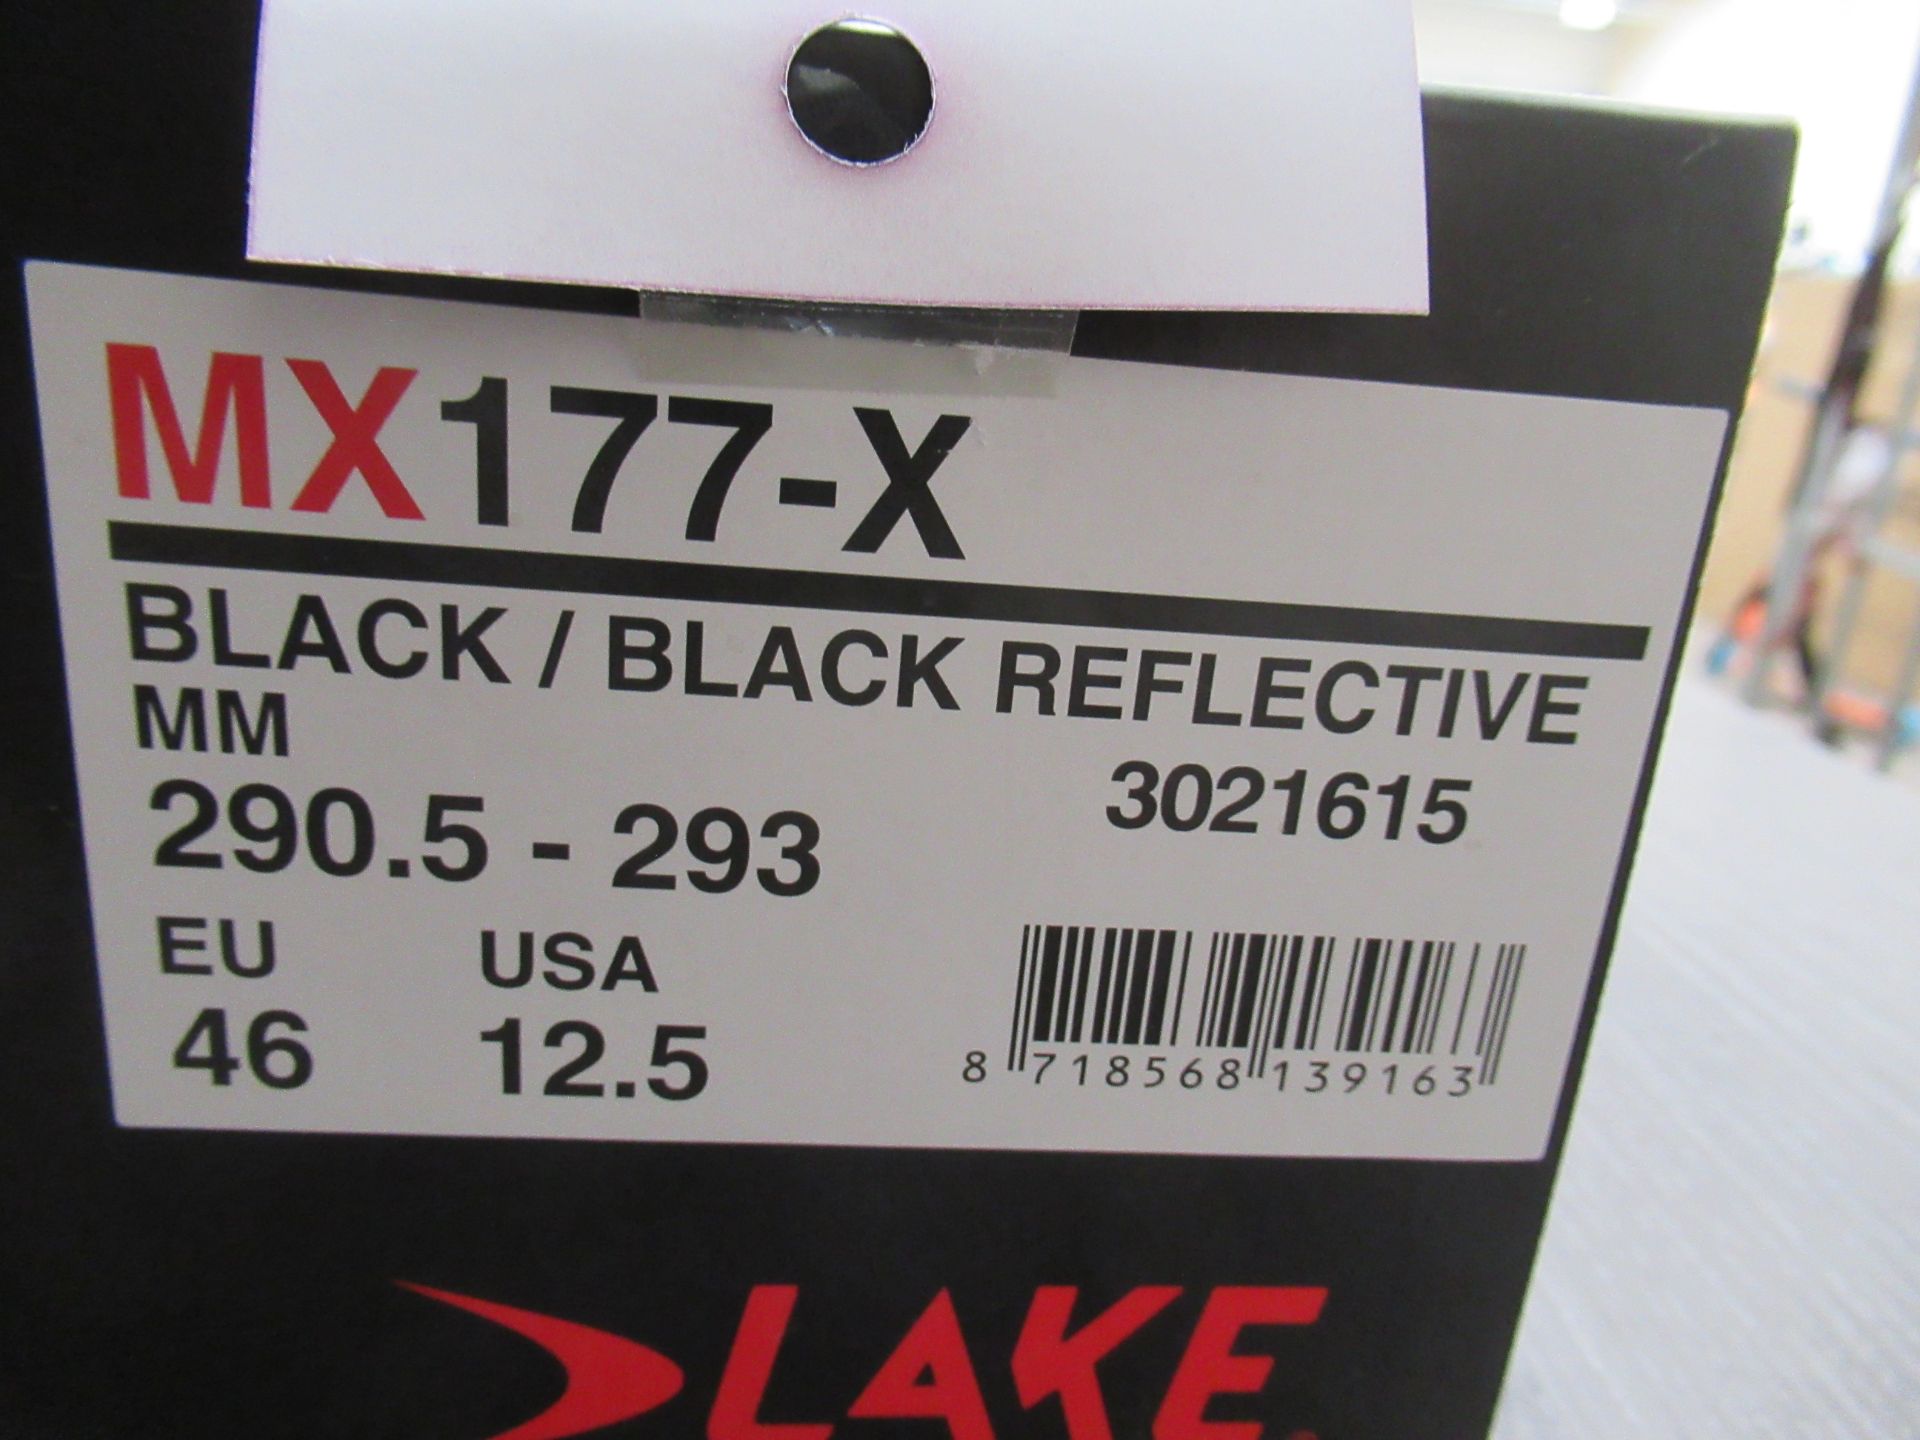 Pair of Lake MX177-X cycling shoes (black/black reflective) - boxed EU size 46 - (RRP£150) - Image 3 of 4